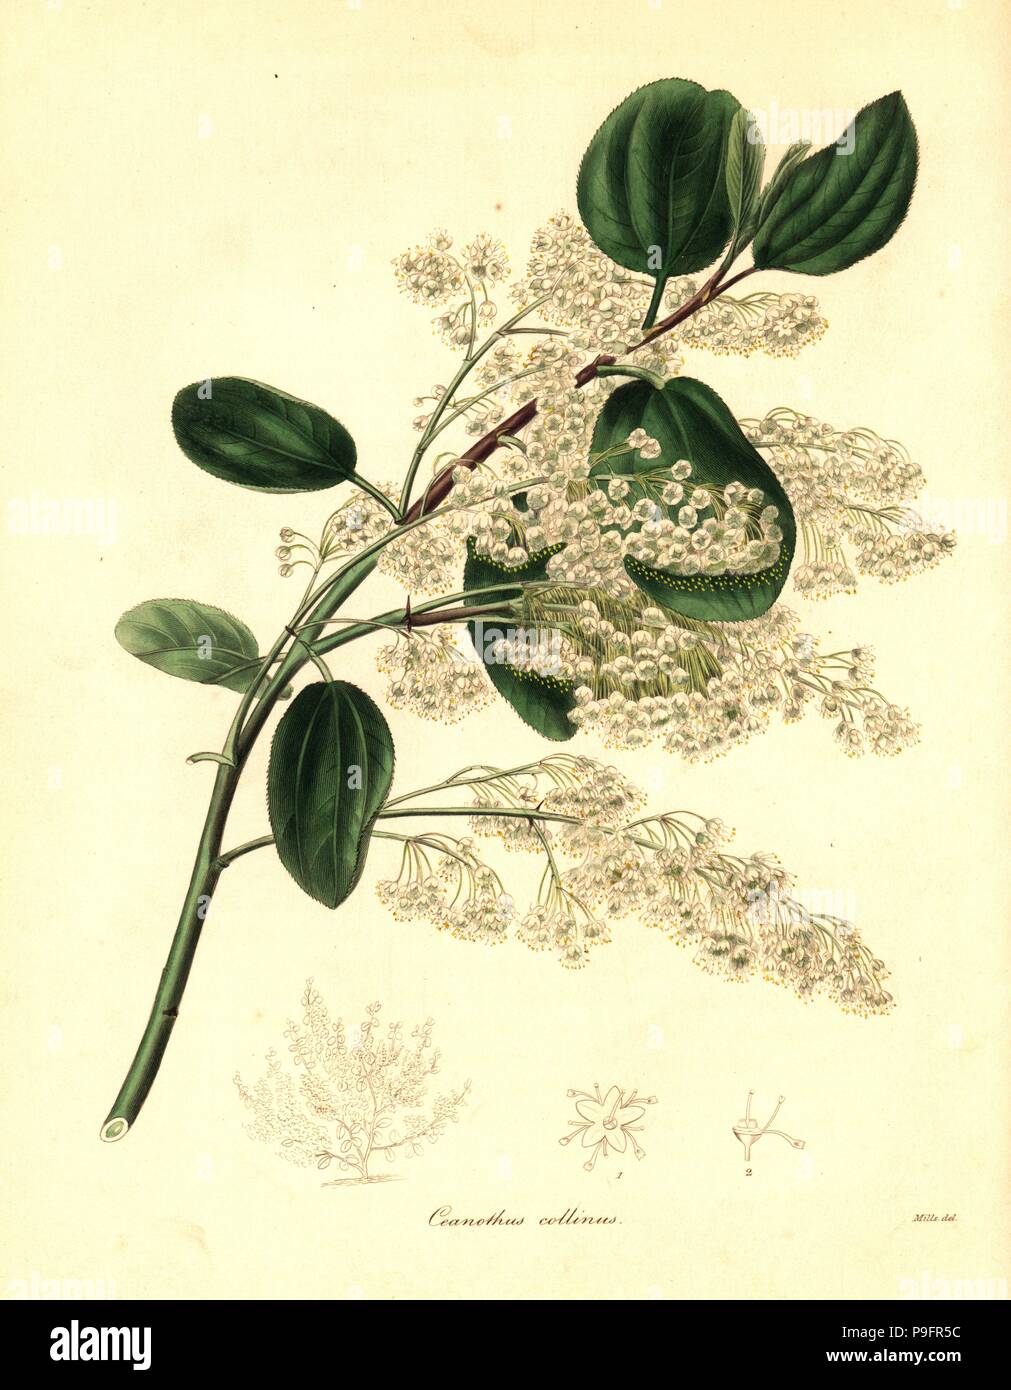 California lilac, Ceanothus species (Ceanothus of the hills, Ceanothus collinus). Handcoloured copperplate engraving after a botanical illustration by Mills from Benjamin Maund and the Rev. John Stevens Henslow's The Botanist, London, 1836. Stock Photo